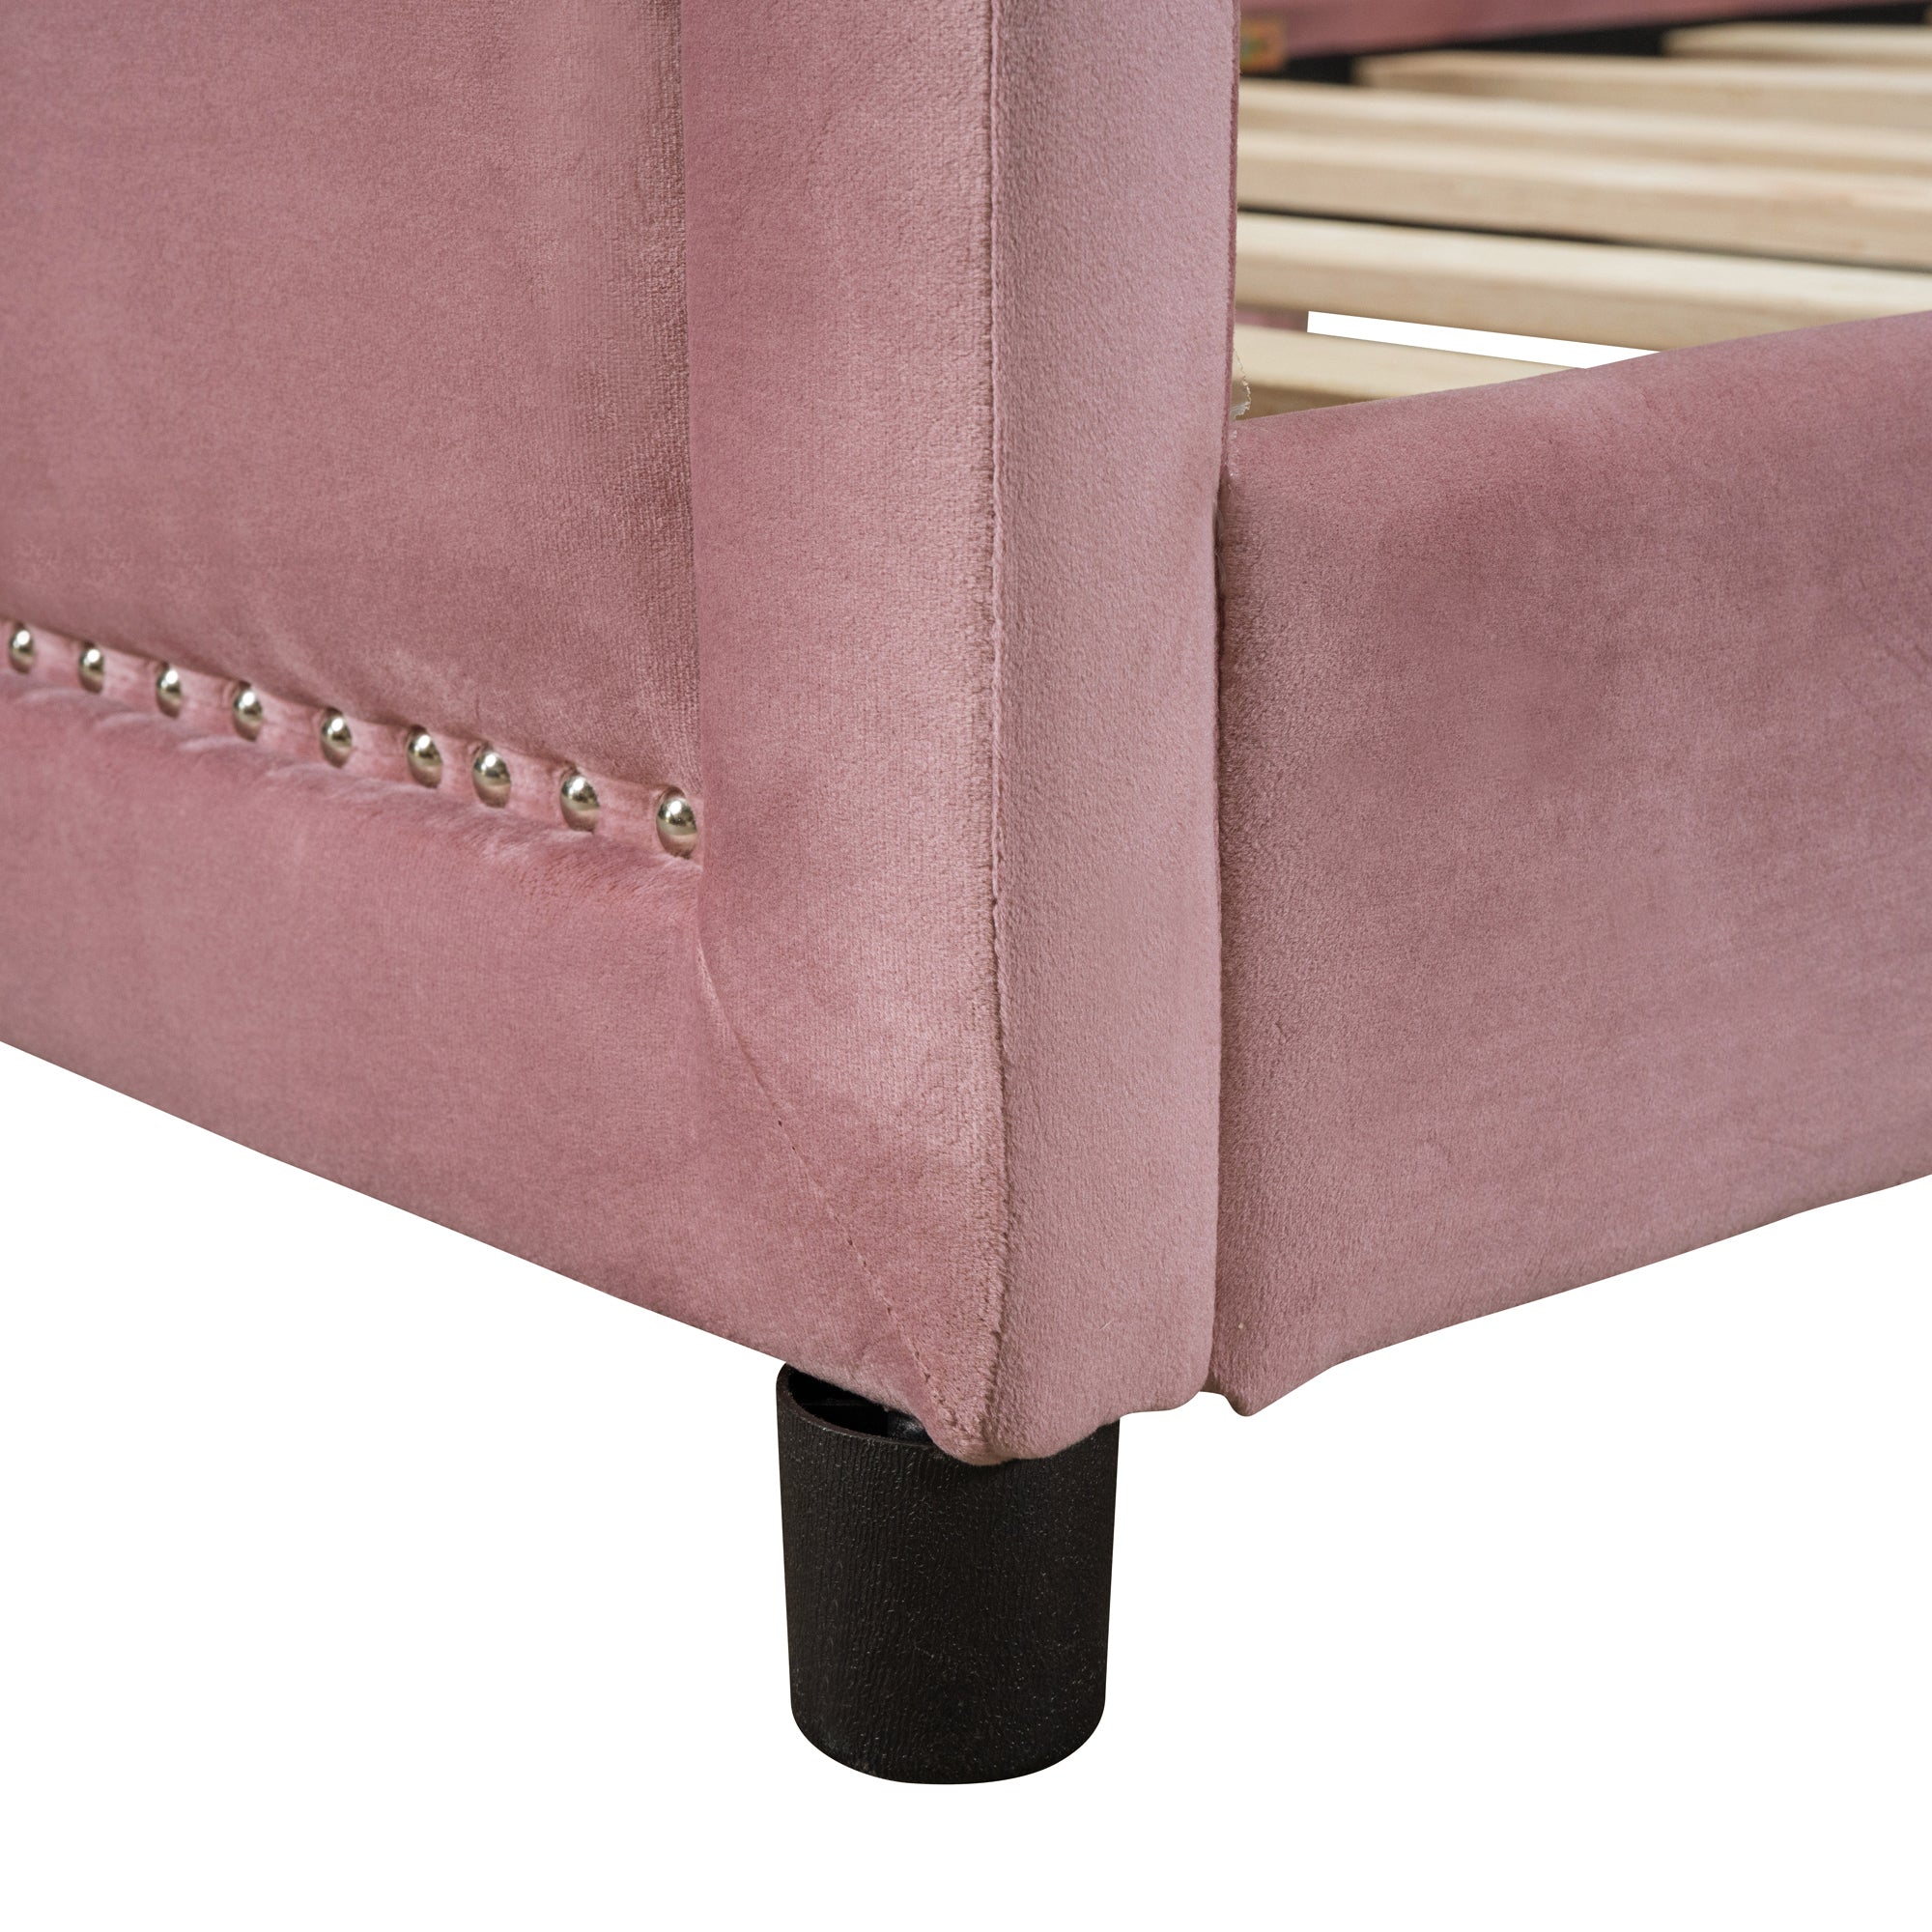 Twin Size Upholstered Daybed with Classic Stripe Shaped  Headboard - Pink